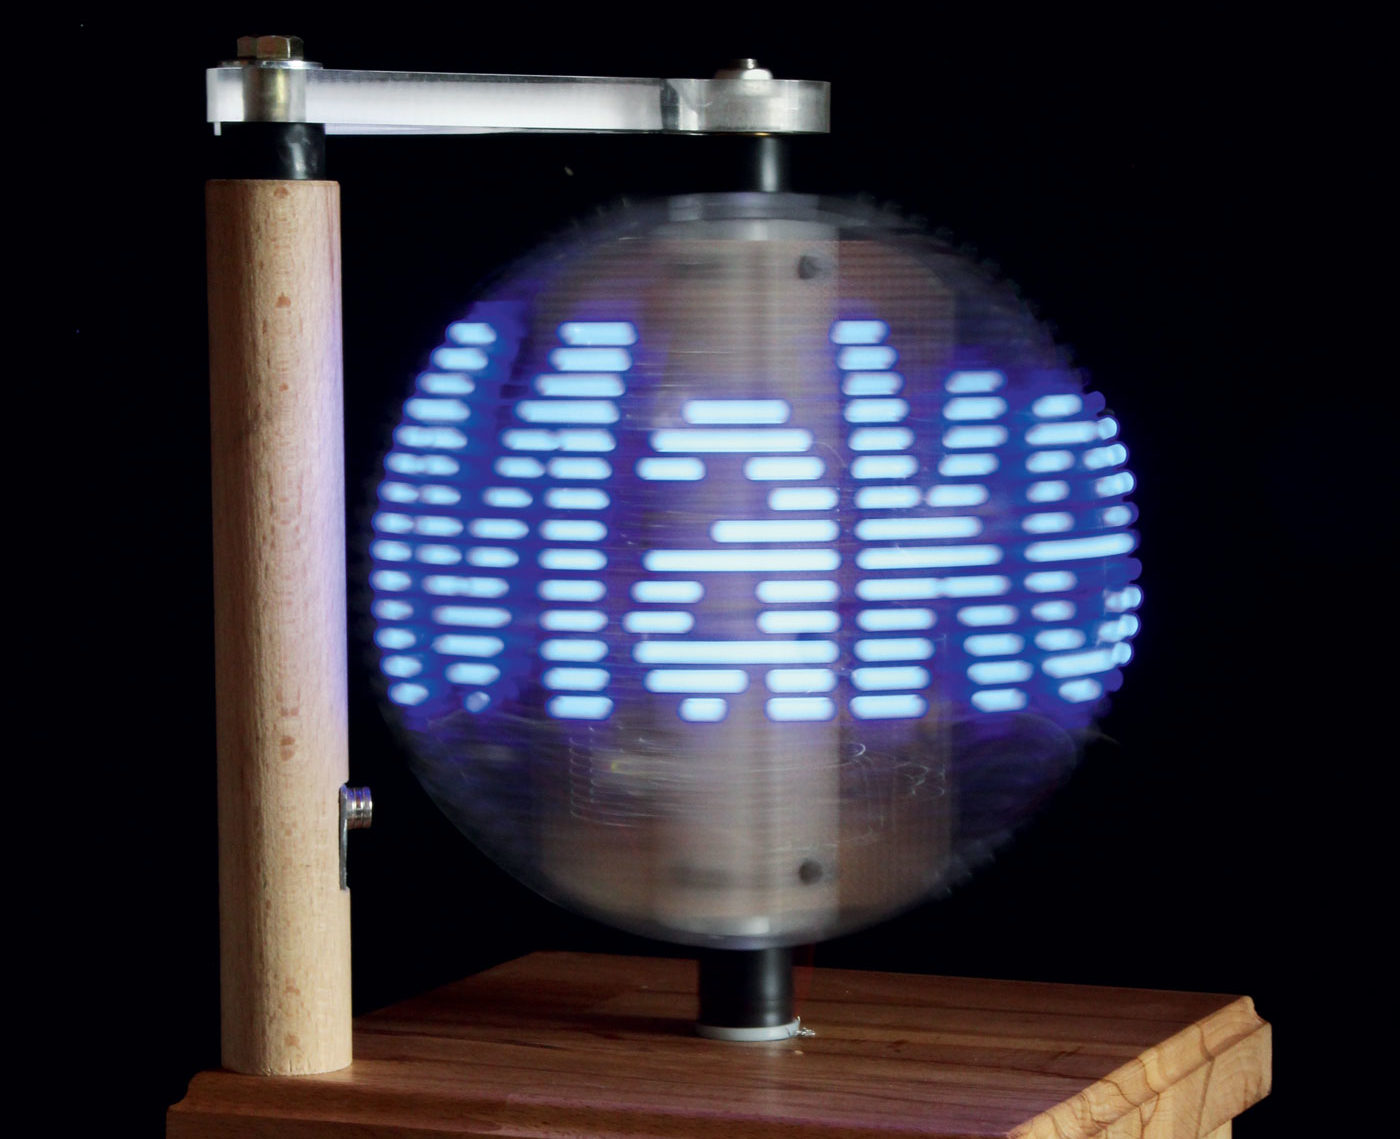 Build a Persistence-of-Vision LED Globe